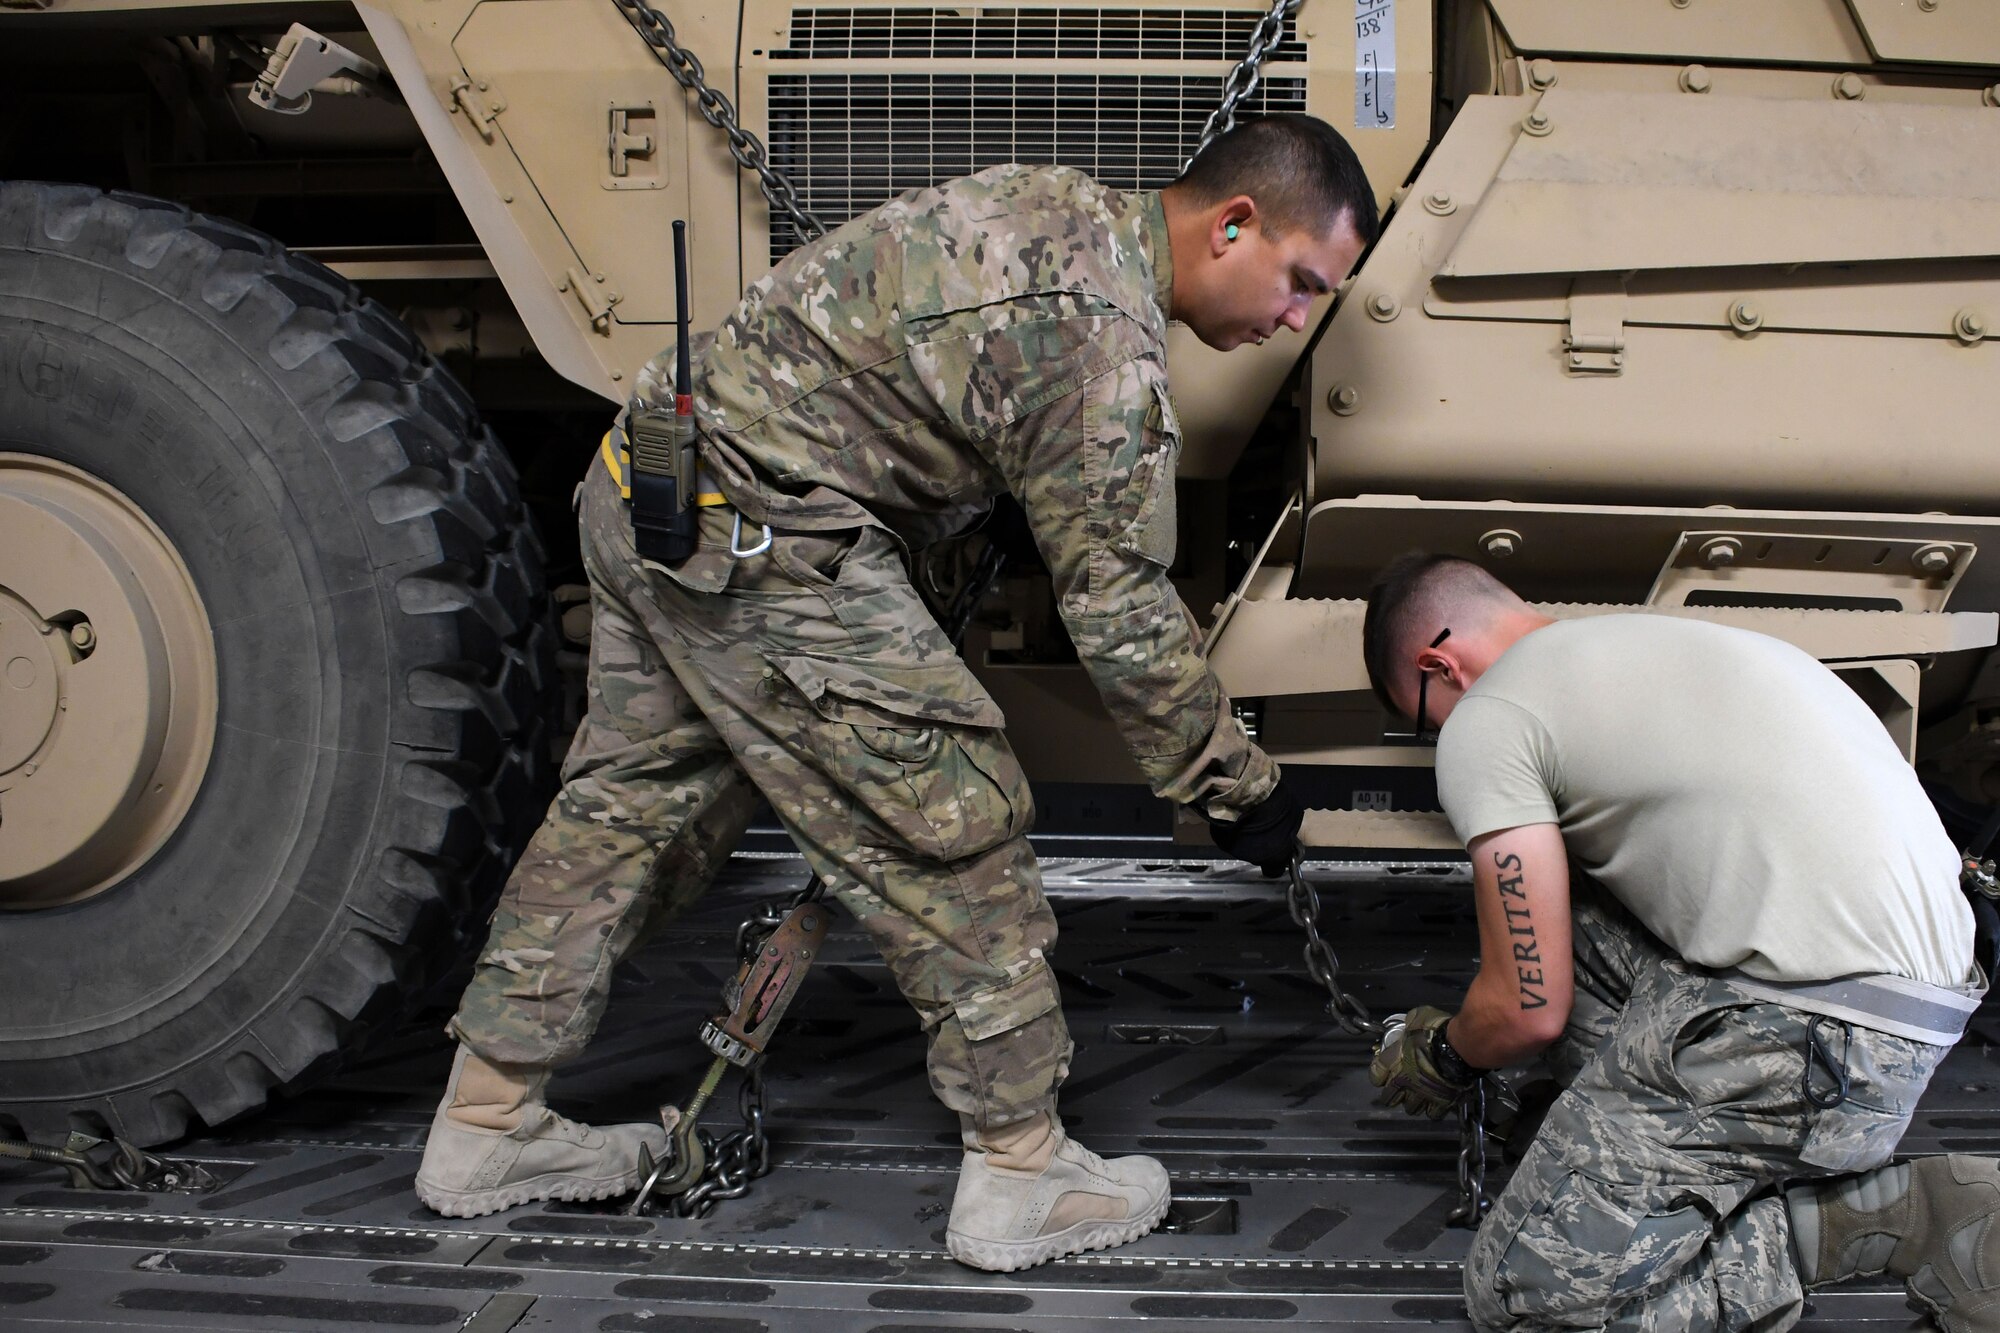 Tech Sgt. Ronald Gowen, a 387th Air Expeditionary Squadron logistician, left, helps Staff Sgt. Dylan Collins, a 386th Expeditionary Logistics Readiness Squadron aerial porter, right, with securing a mine-resistant ambush-protected vehicle in the cargo area of a C-17 Globemaster III at an undisclosed location in Southwest Asia Nov. 4, 2016. Gowen is currently embedded with  the 386th Expeditionary Logistics Readiness Squadron as he awaits transfer to a joint unit. 